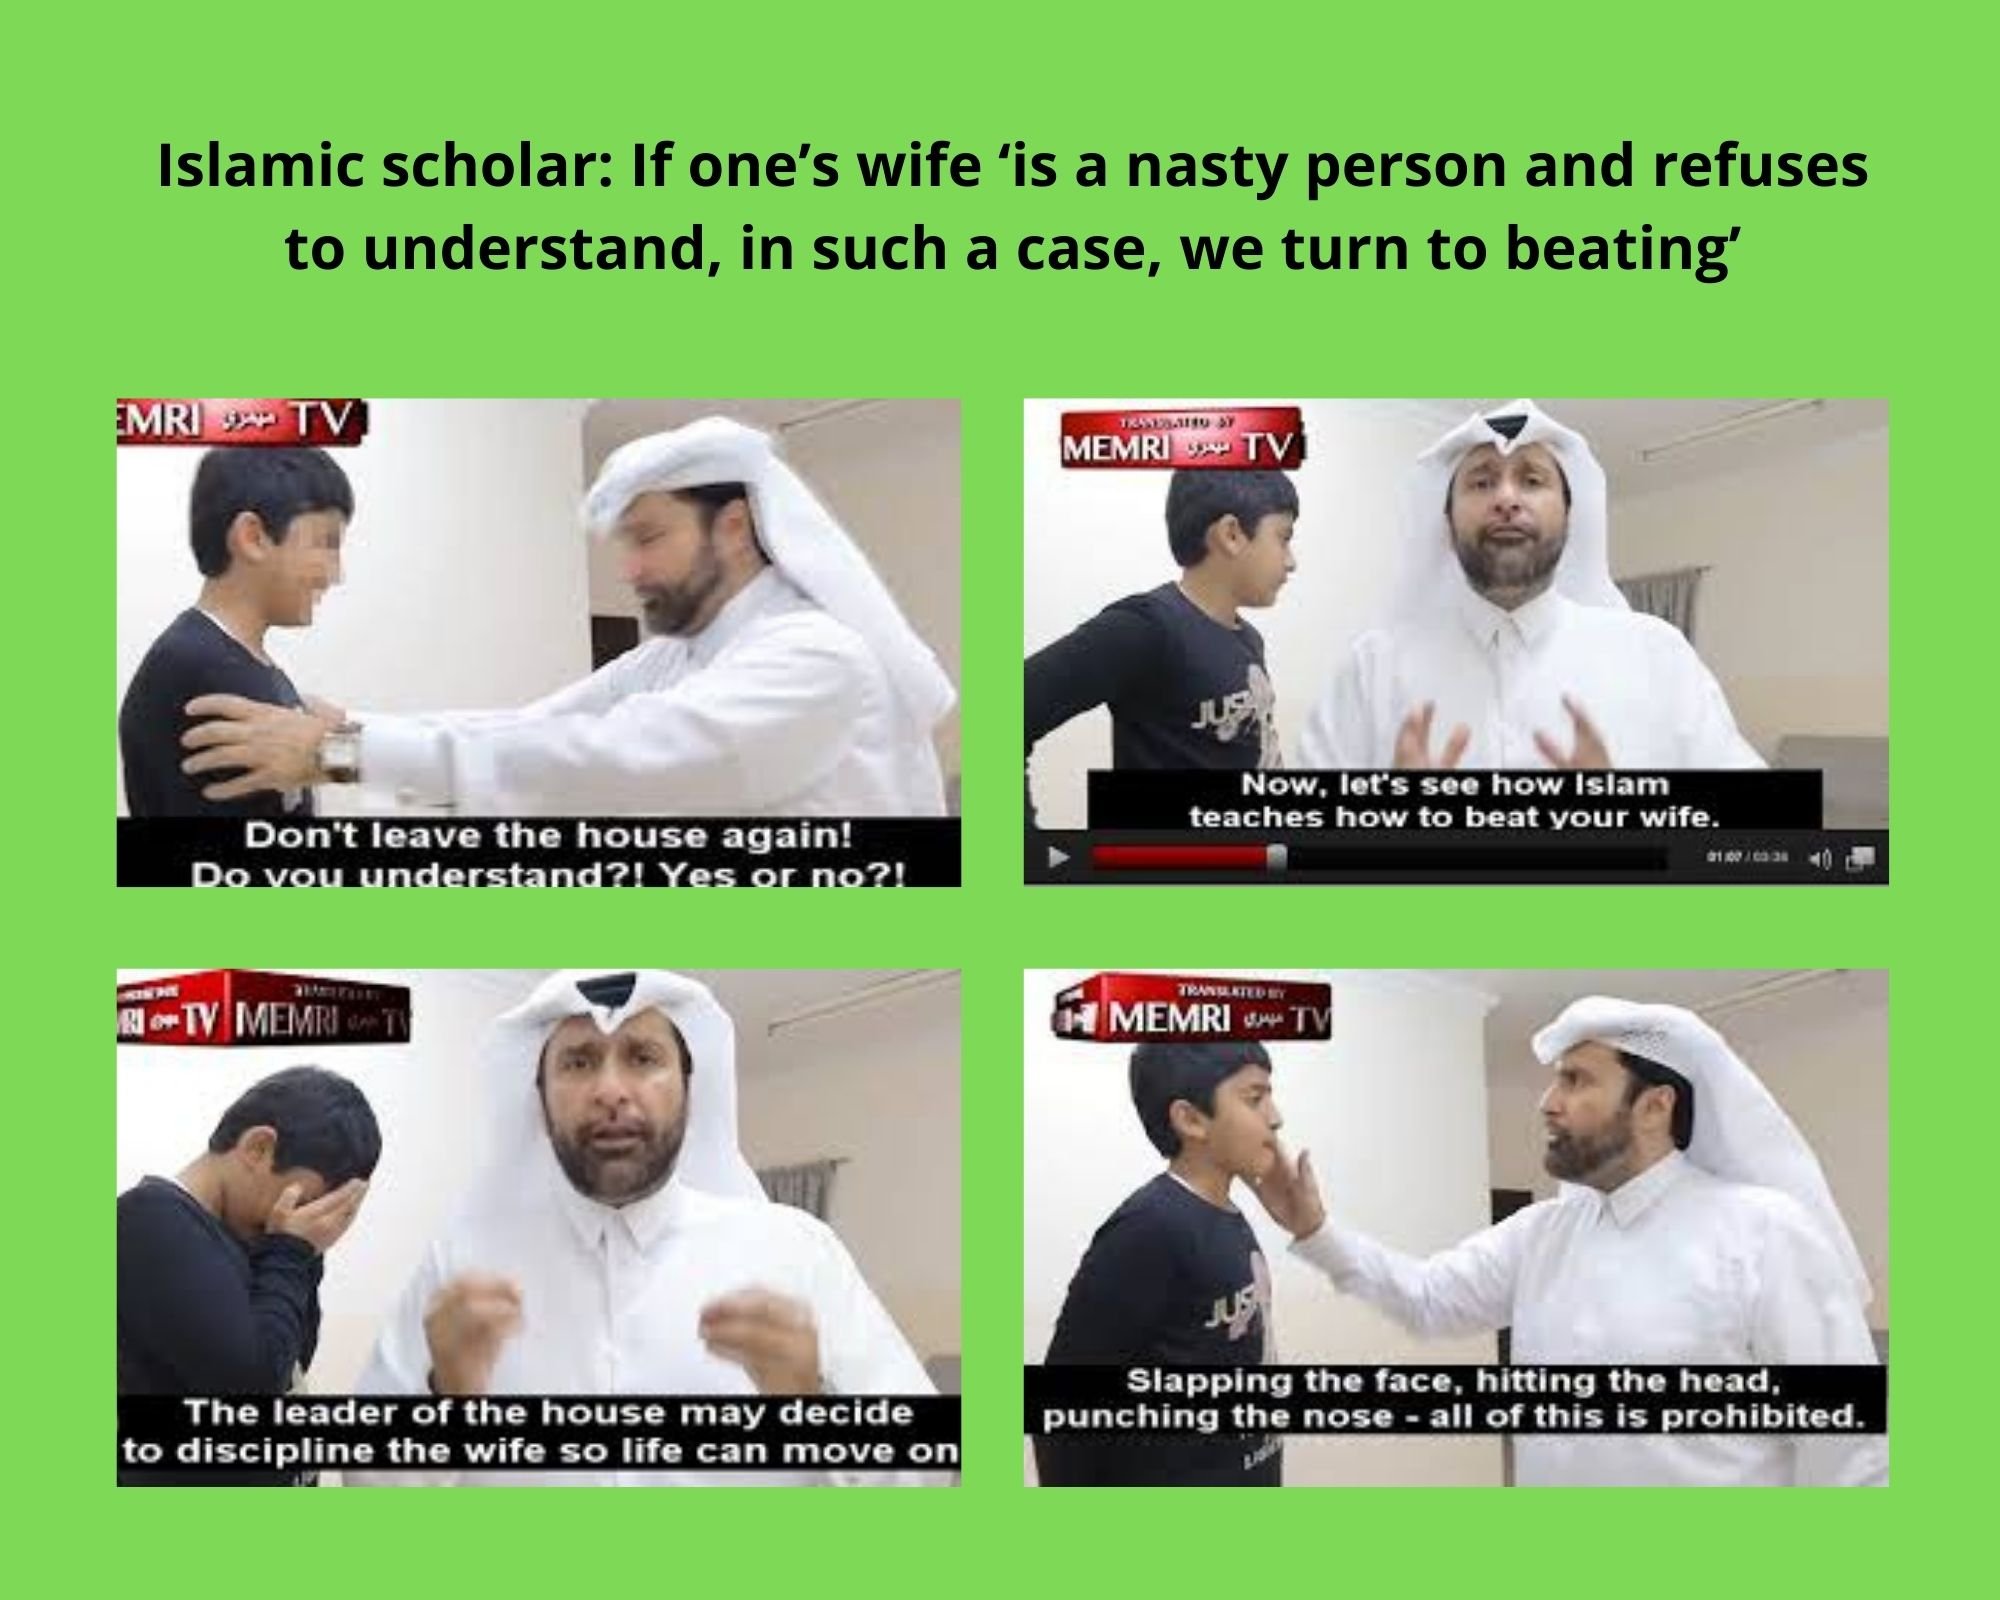 Egyptian Mullah "Scholar" Yosry states: If one's wife a nasty person and refuses to understand, in such a case, we to beating' - Kreately